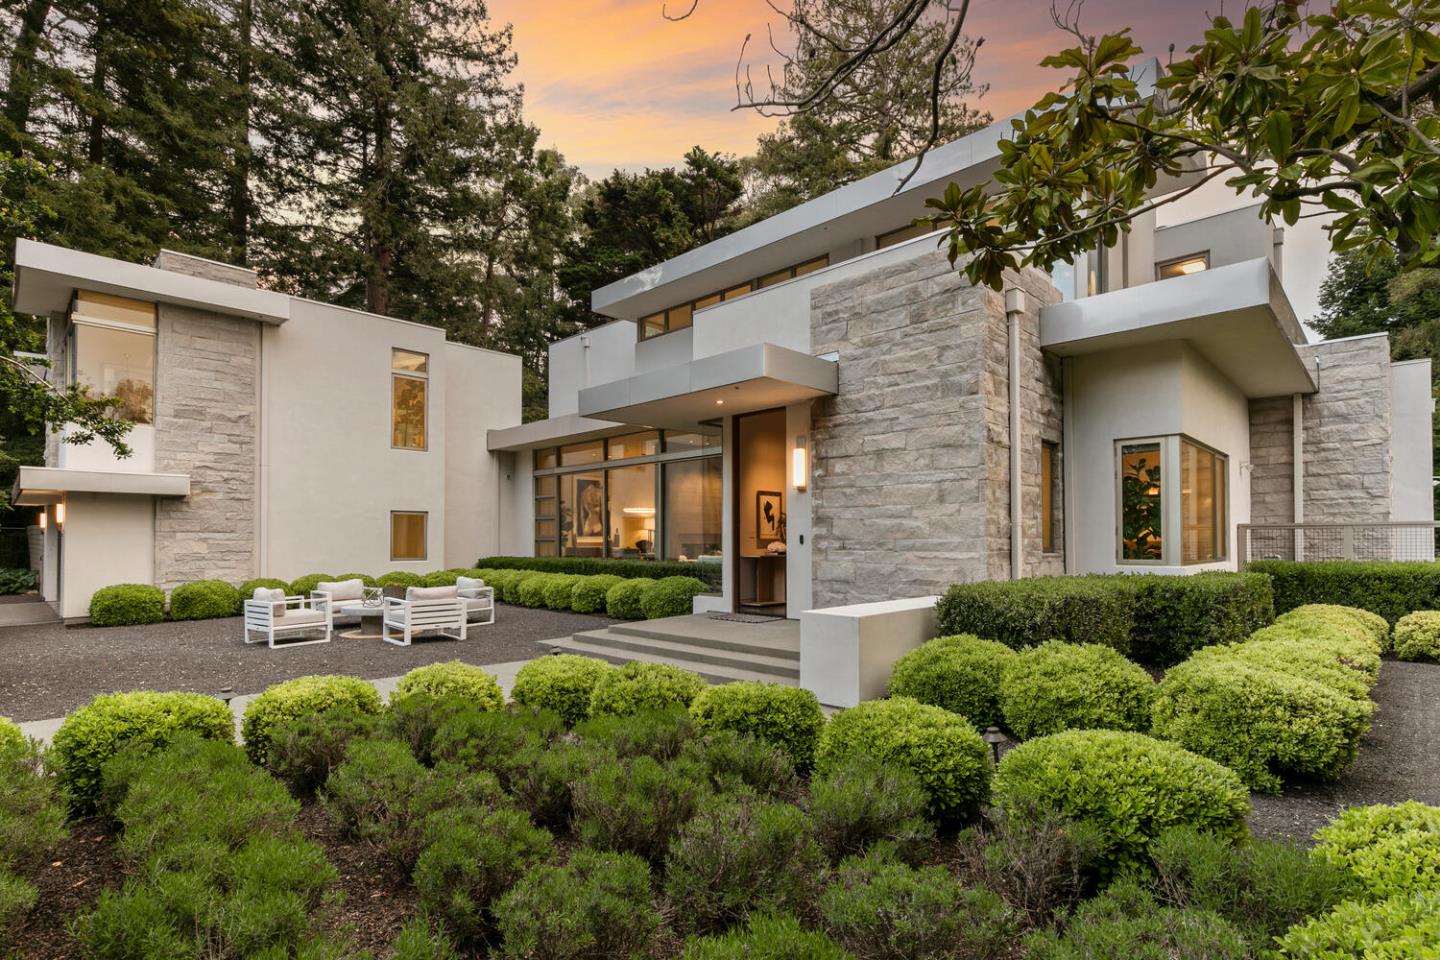 This modern masterpiece, built in 2018 embraces mid-century aesthetics and design principles in Lower Hillsborough on a secluded half-acre. Designed by Nancy Sheinholtz Associates, the home is surrounded by redwoods and features a modern facade of stainless steel and stone. Inside, polished concrete floors and glass walls underscore the modern vibe. The layout promotes indoor/outdoor living with retractable glass doors connecting the spacious great room to the outdoor pool area. The kitchen is a modern culinary space with top-tier appliances. There are 5 bedrooms, each with its own bath, plus an office. Main-level bedroom suite, upstairs primary suite and two additional suites, plus a private upstairs multi-room suite near an outside entrance offers flexibility for remote work needs or extended family/guest quarters. Outdoor entertainment is a breeze with a large pool, fire pit, and barbecue kitchen. Midway between San Francisco & Silicon Valley. Excellent public and private schools.